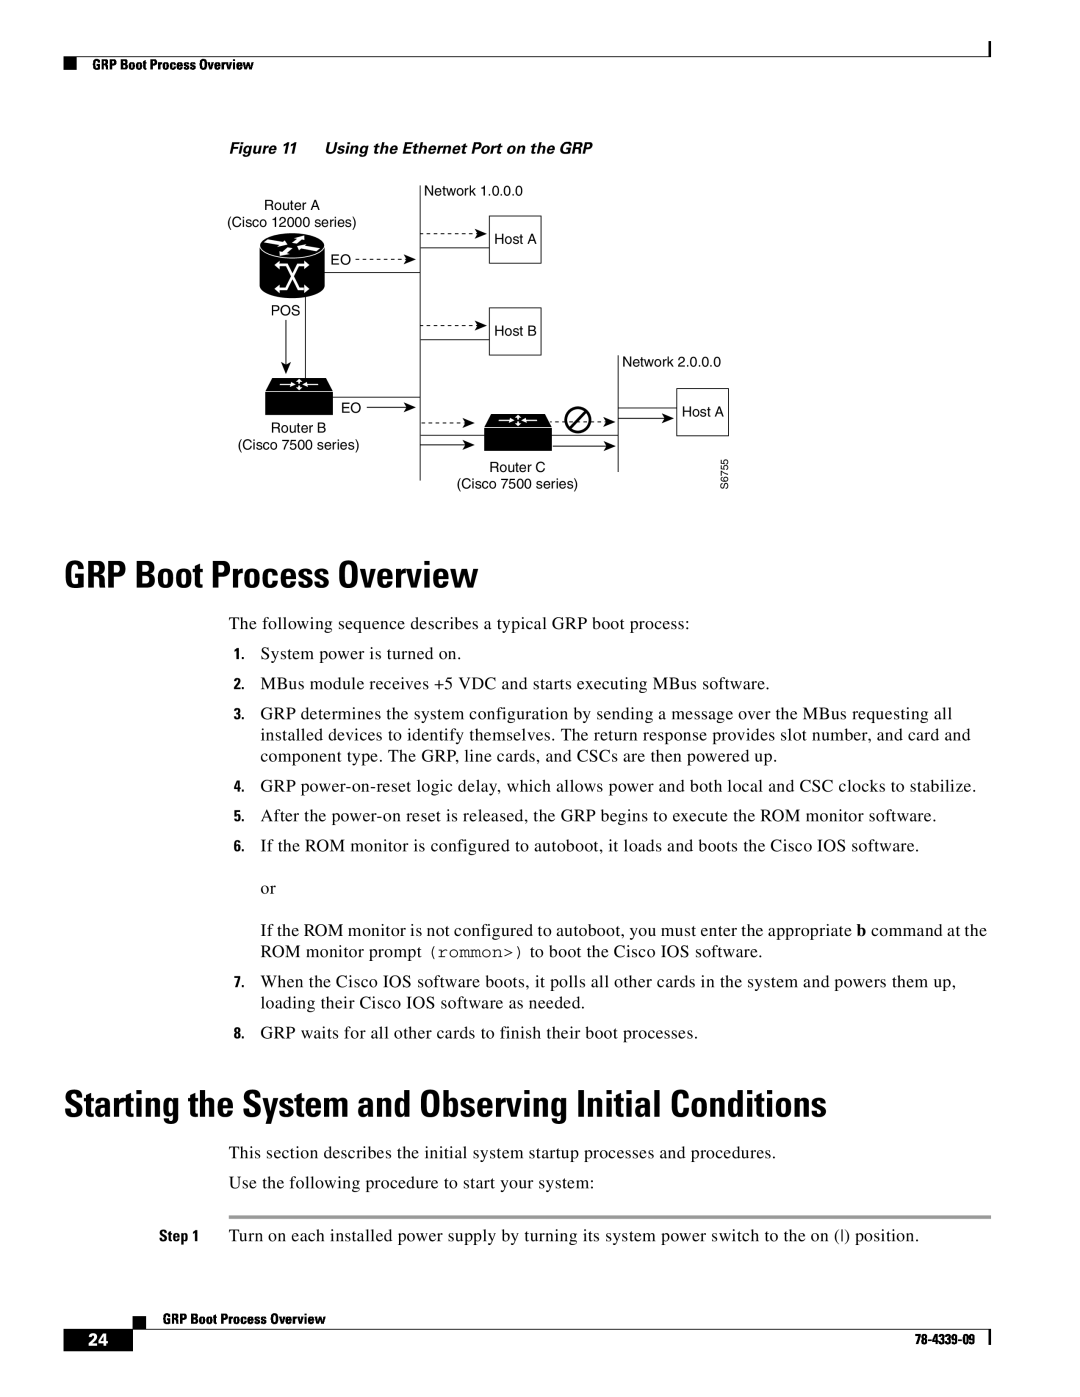 Cisco Systems GRP-B manual GRP Boot Process Overview, Starting the System and Observing Initial Conditions 